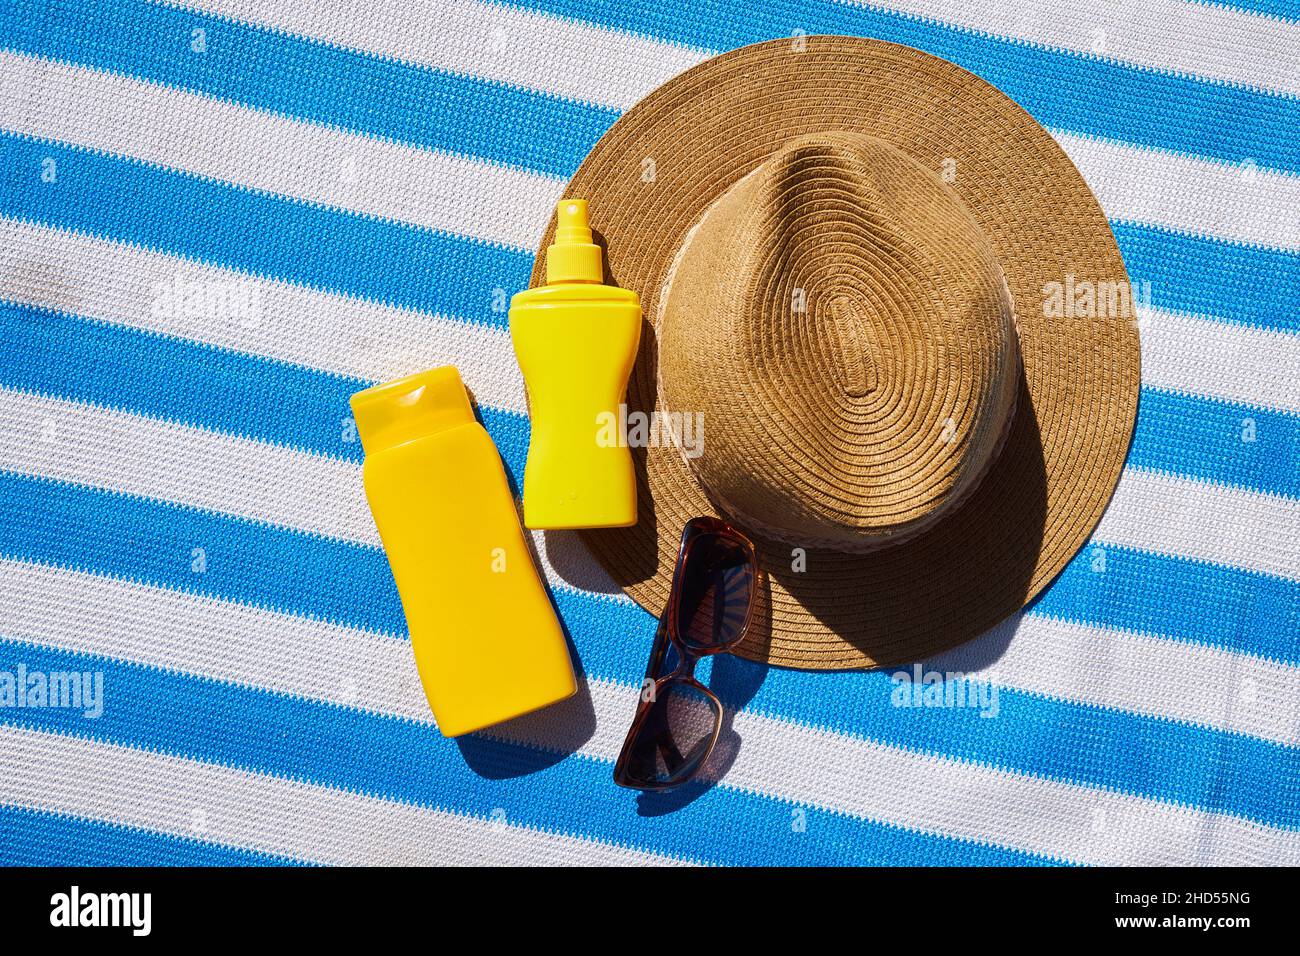 Yellow sunscreen cream bottles for skin protection, sun glasses, straw hat on the blue striped mattress. Summer recreation concept. Flat lay Stock Photo